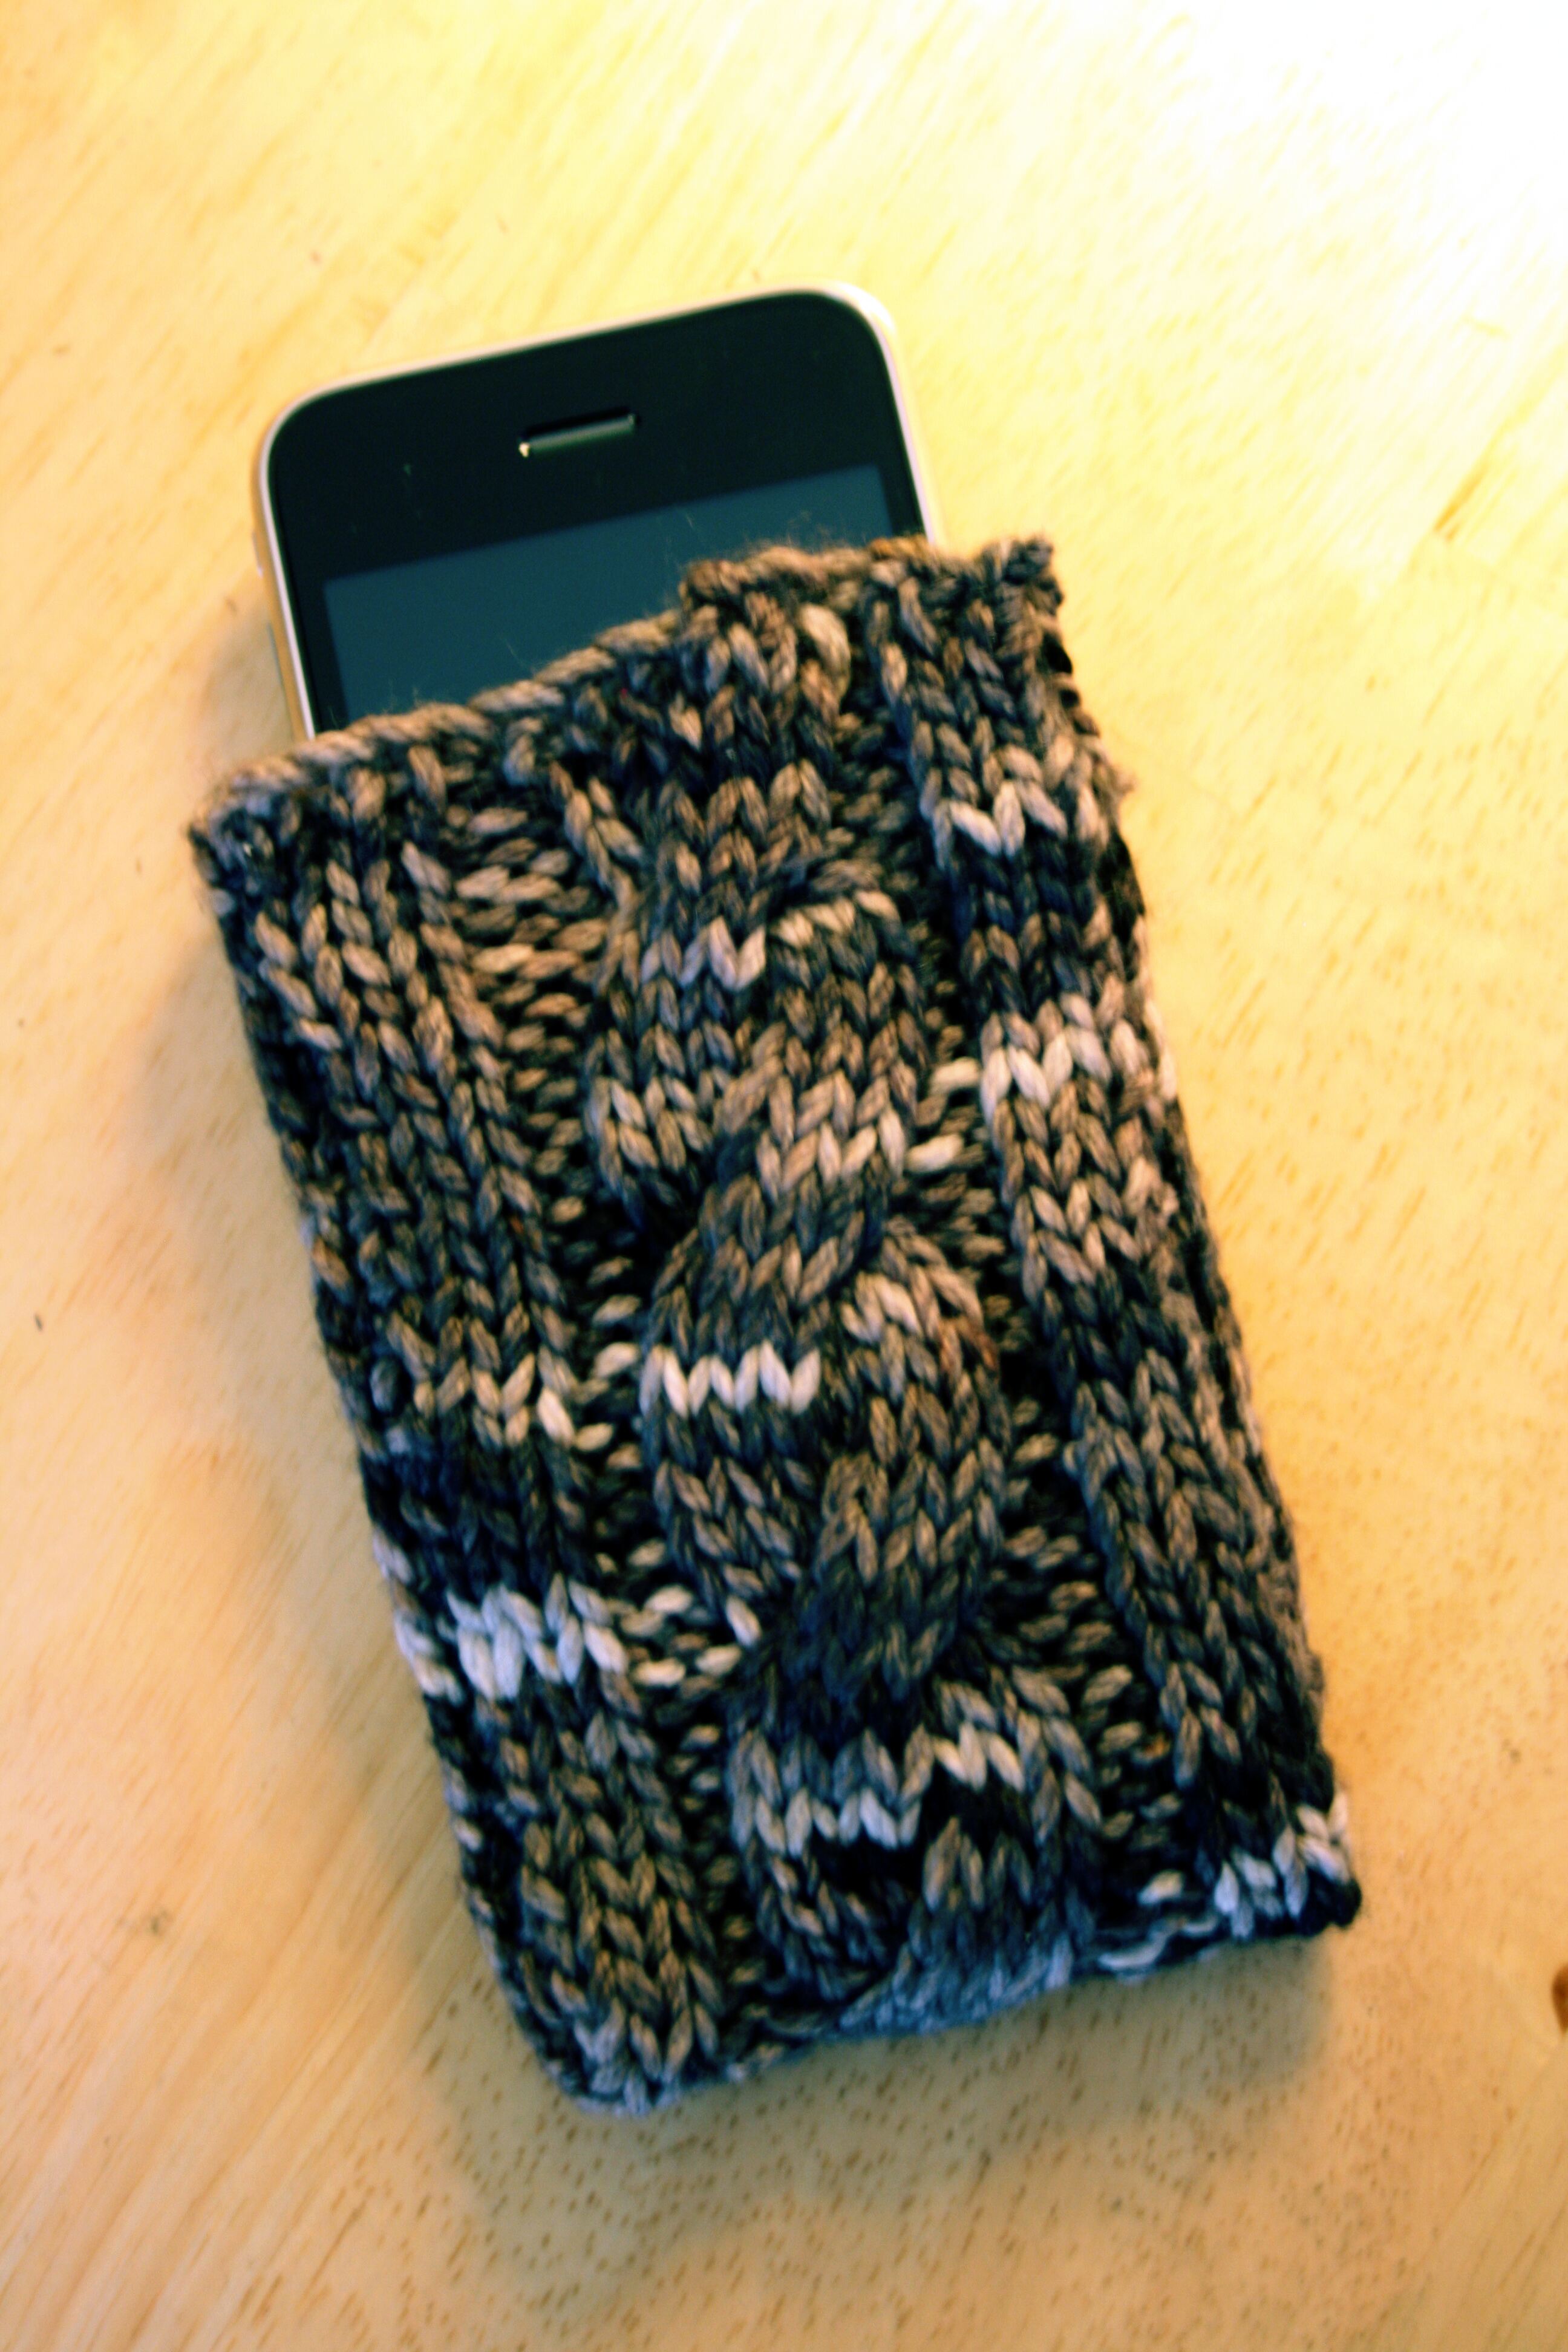 Phone sock made from sock